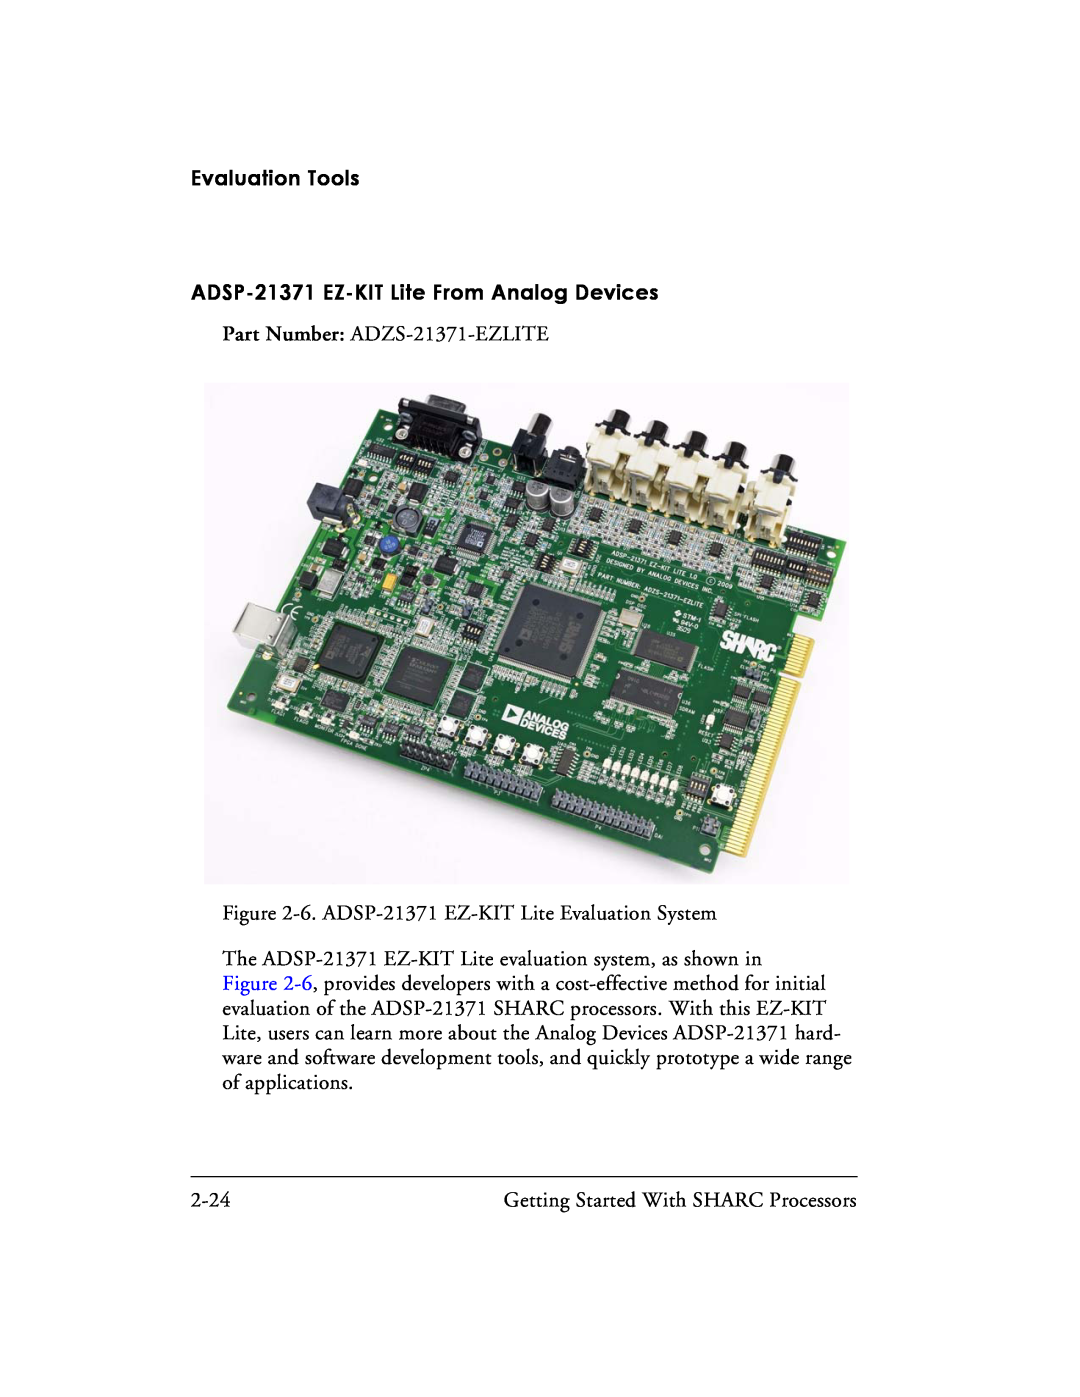 Analog Devices 82-003536-01 manual ADSP-21371 EZ-KITLite From Analog Devices, Evaluation Tools 